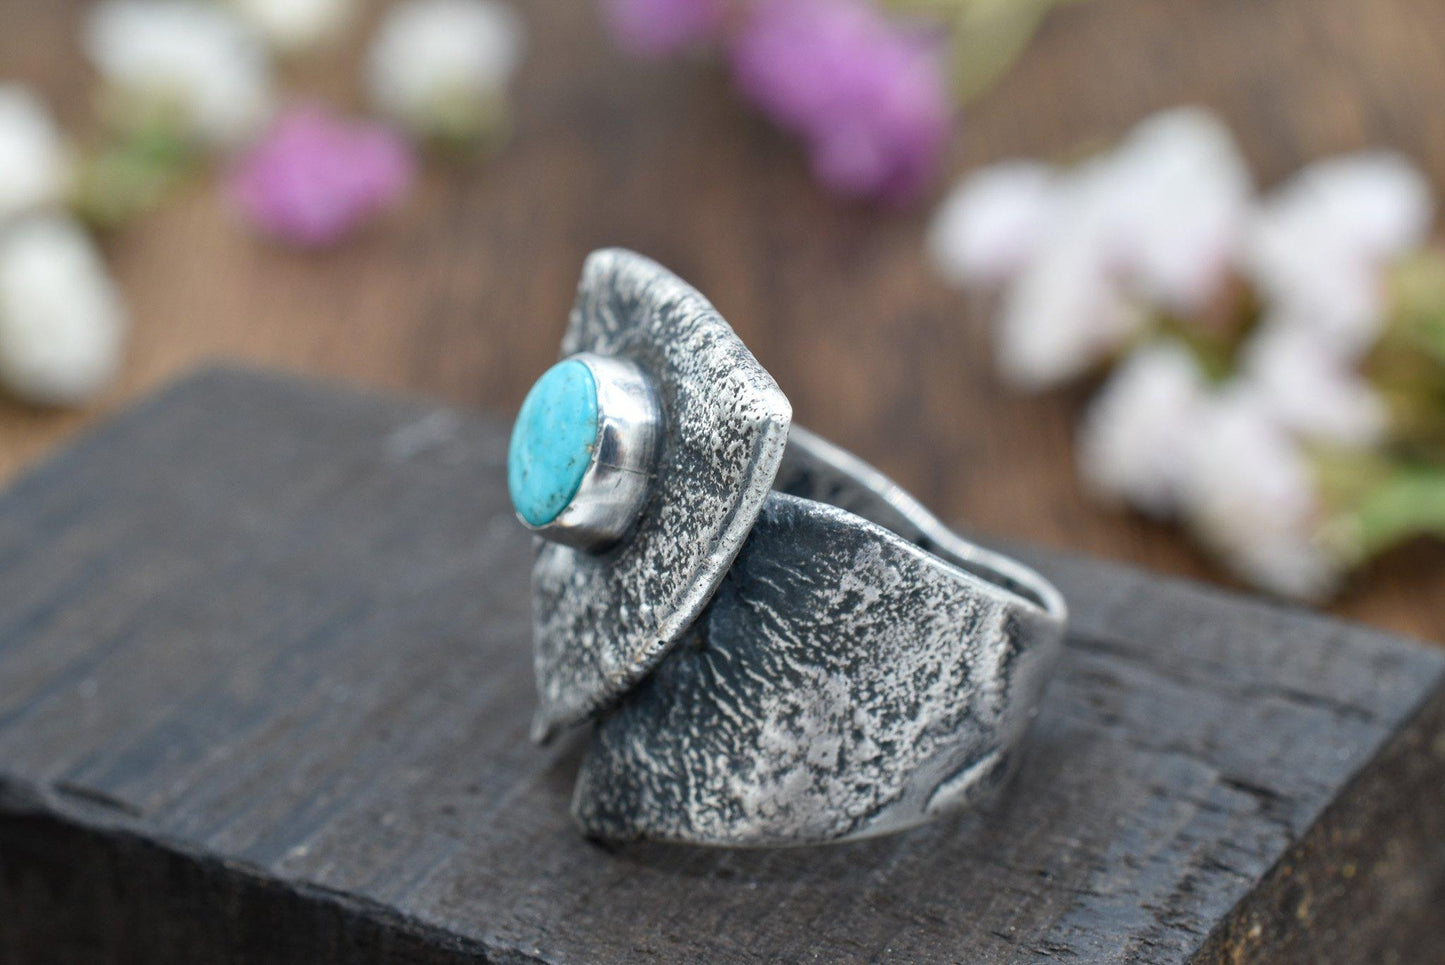 Turquoise Triangle Shield Ring - Size 6.5